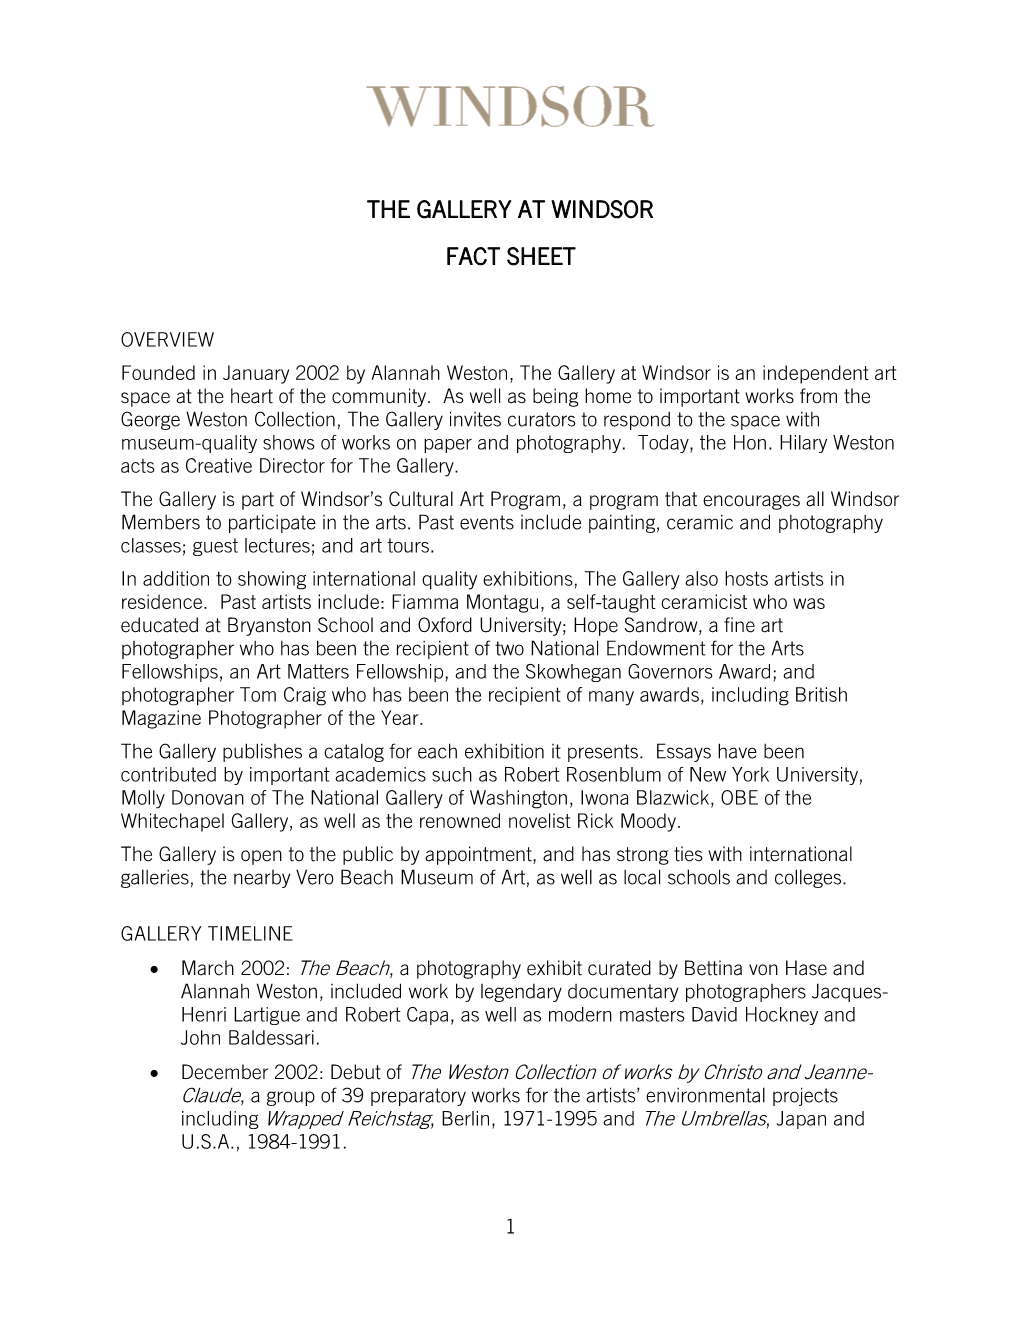 The Gallery Fact Sheet